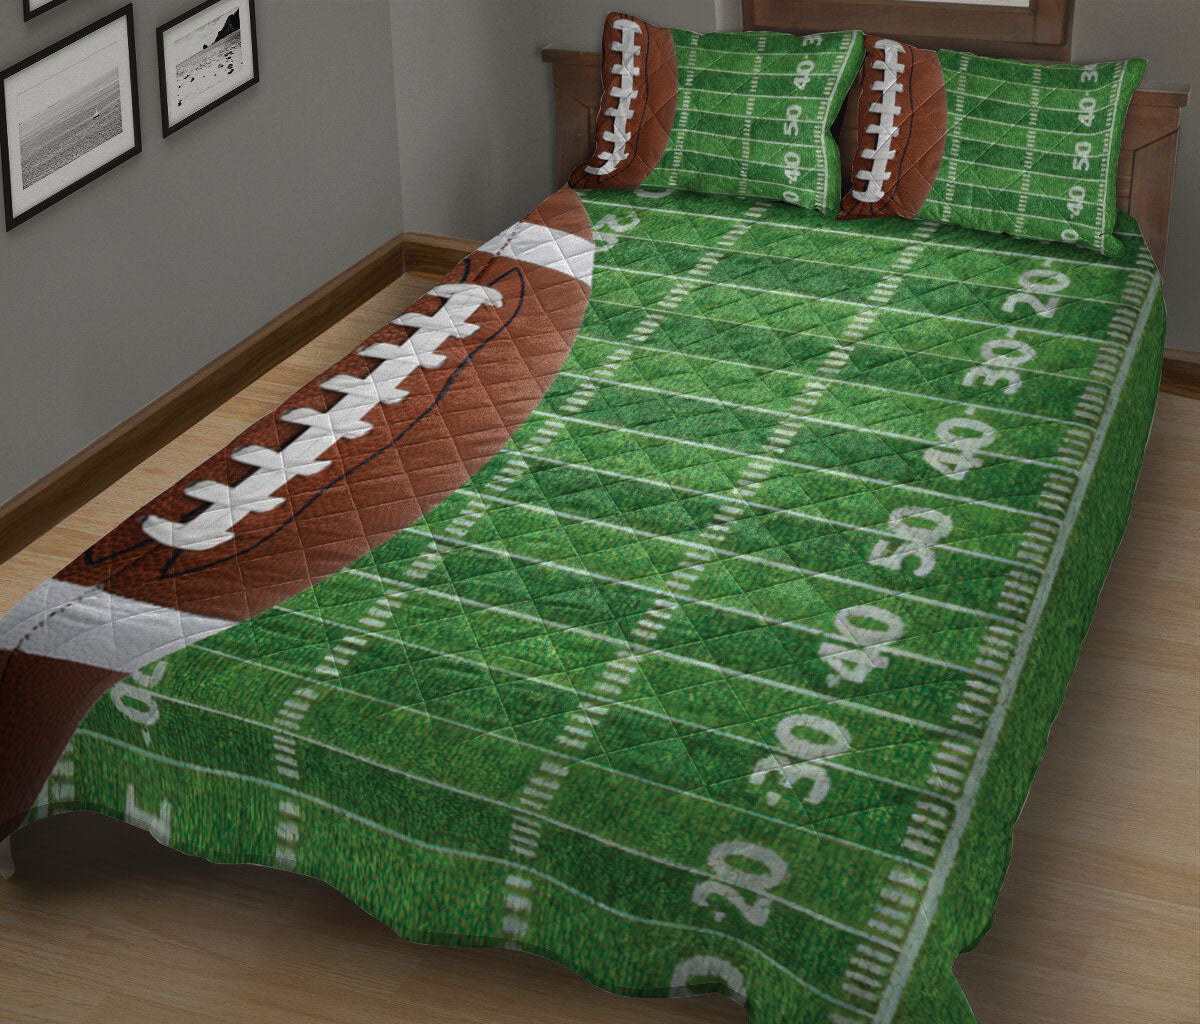 Ohaprints-Quilt-Bed-Set-Pillowcase-American-Football-Ball-Field-Unique-Gift-For-Sports-Lover-Men-Women-Friend-Kid-Blanket-Bedspread-Bedding-2015-King (90'' x 100'')